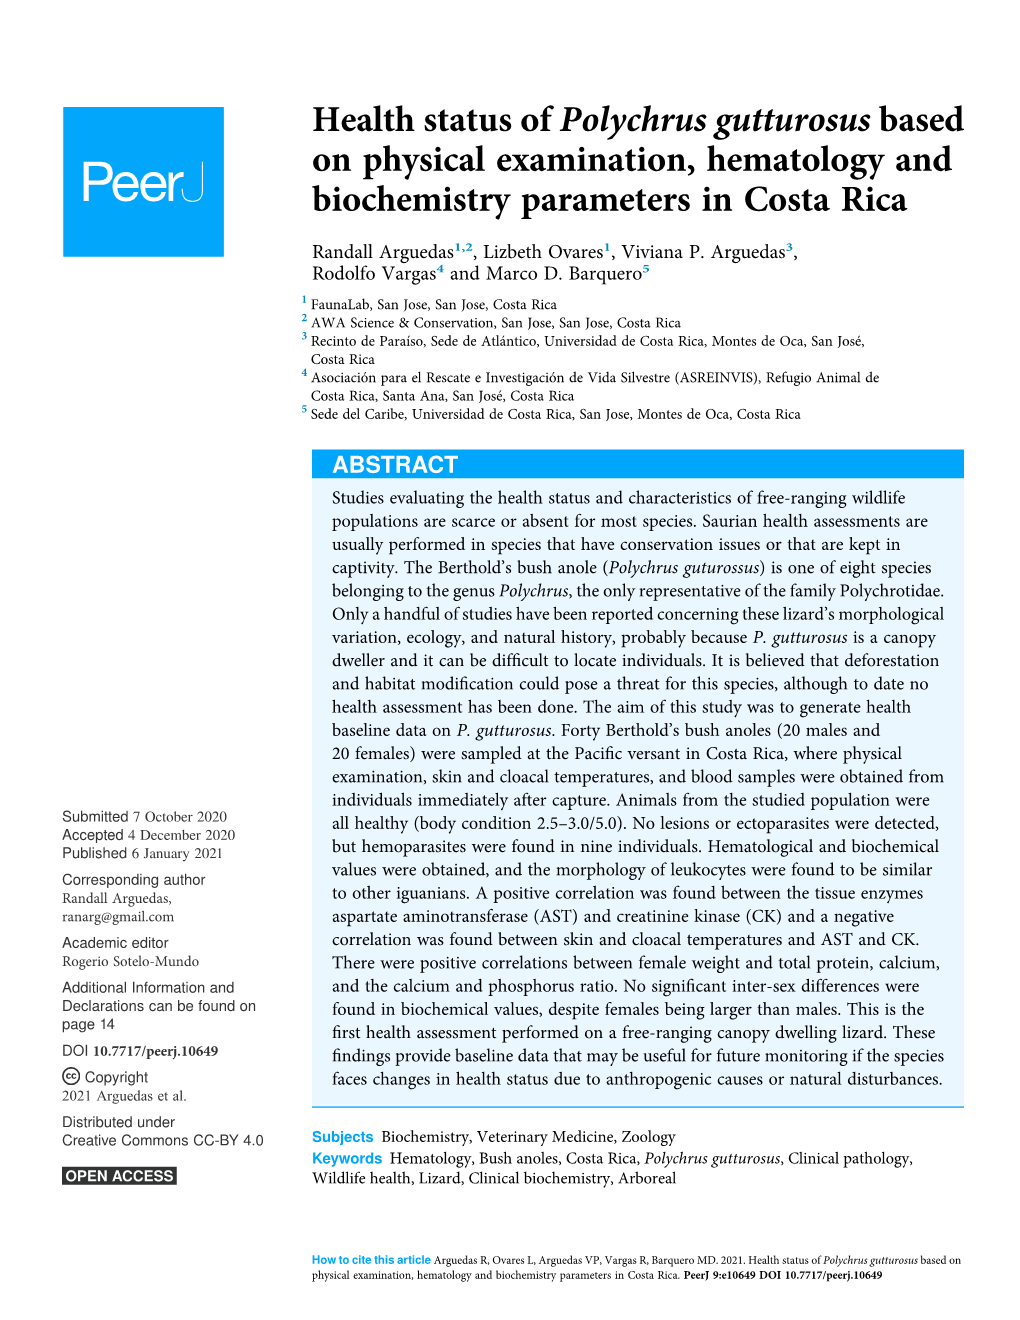 Health Status of Polychrus Gutturosus Based on Physical Examination, Hematology and Biochemistry Parameters in Costa Rica